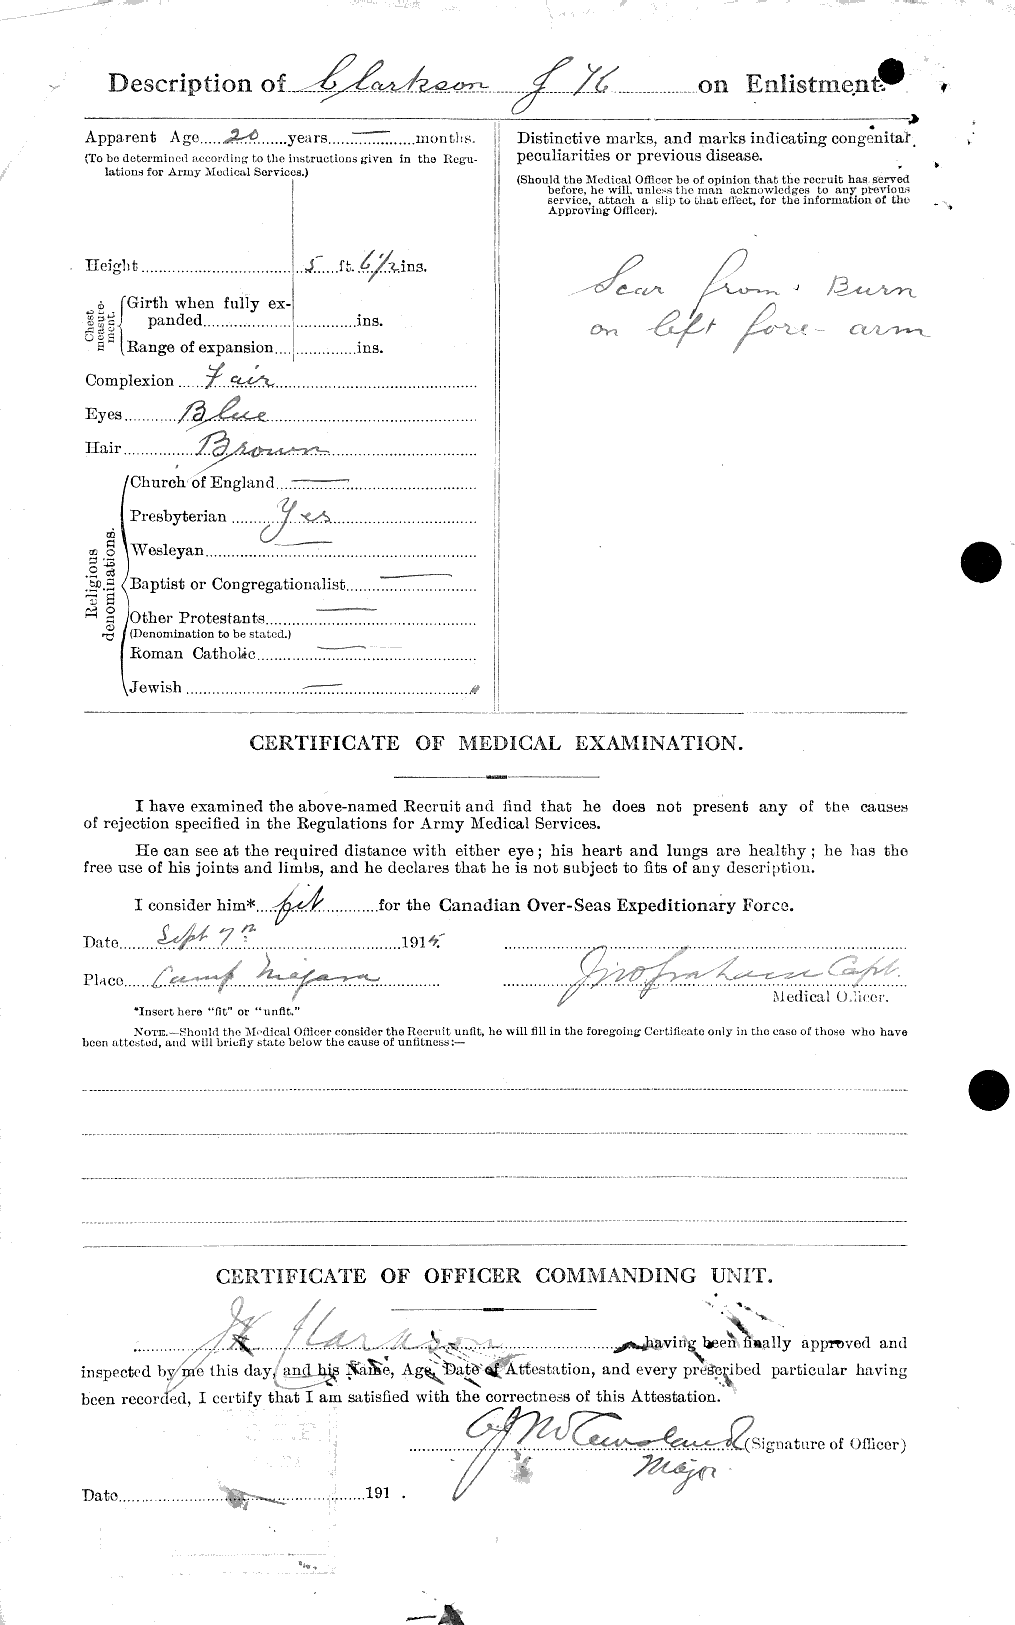 Personnel Records of the First World War - CEF 021448b